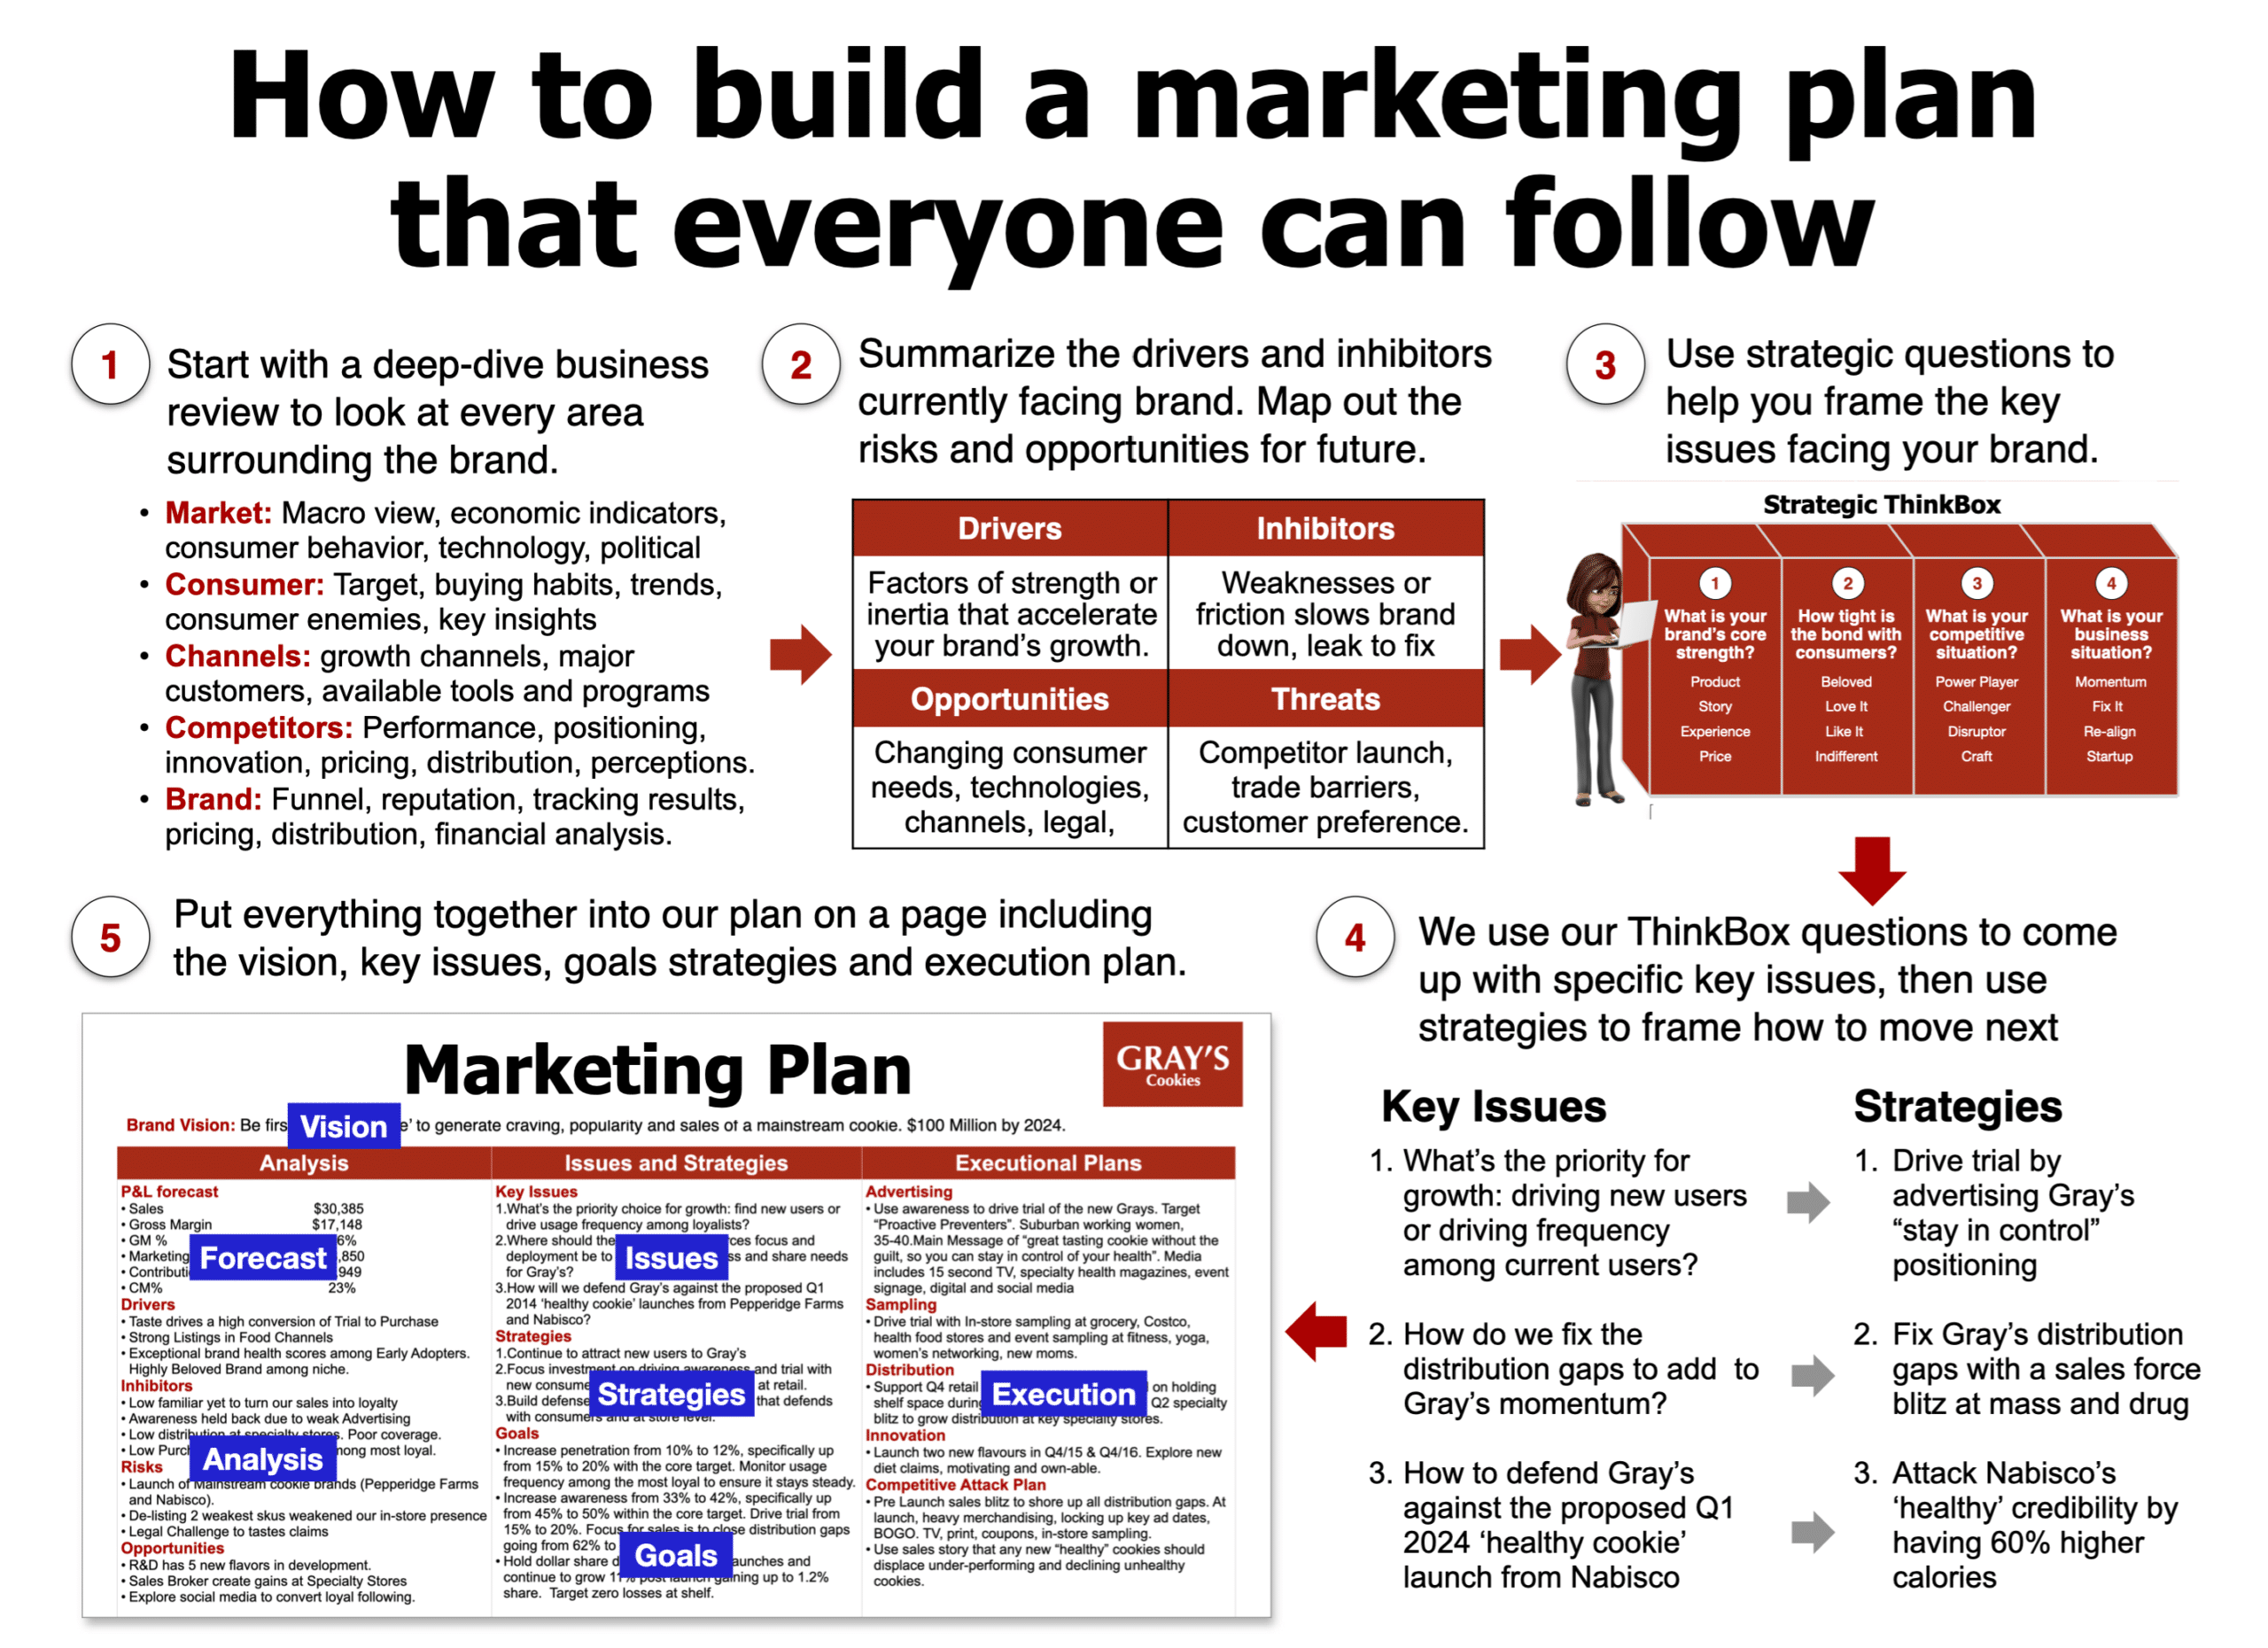 Marketing Strategy: What It Is, How It Works, How To Create One